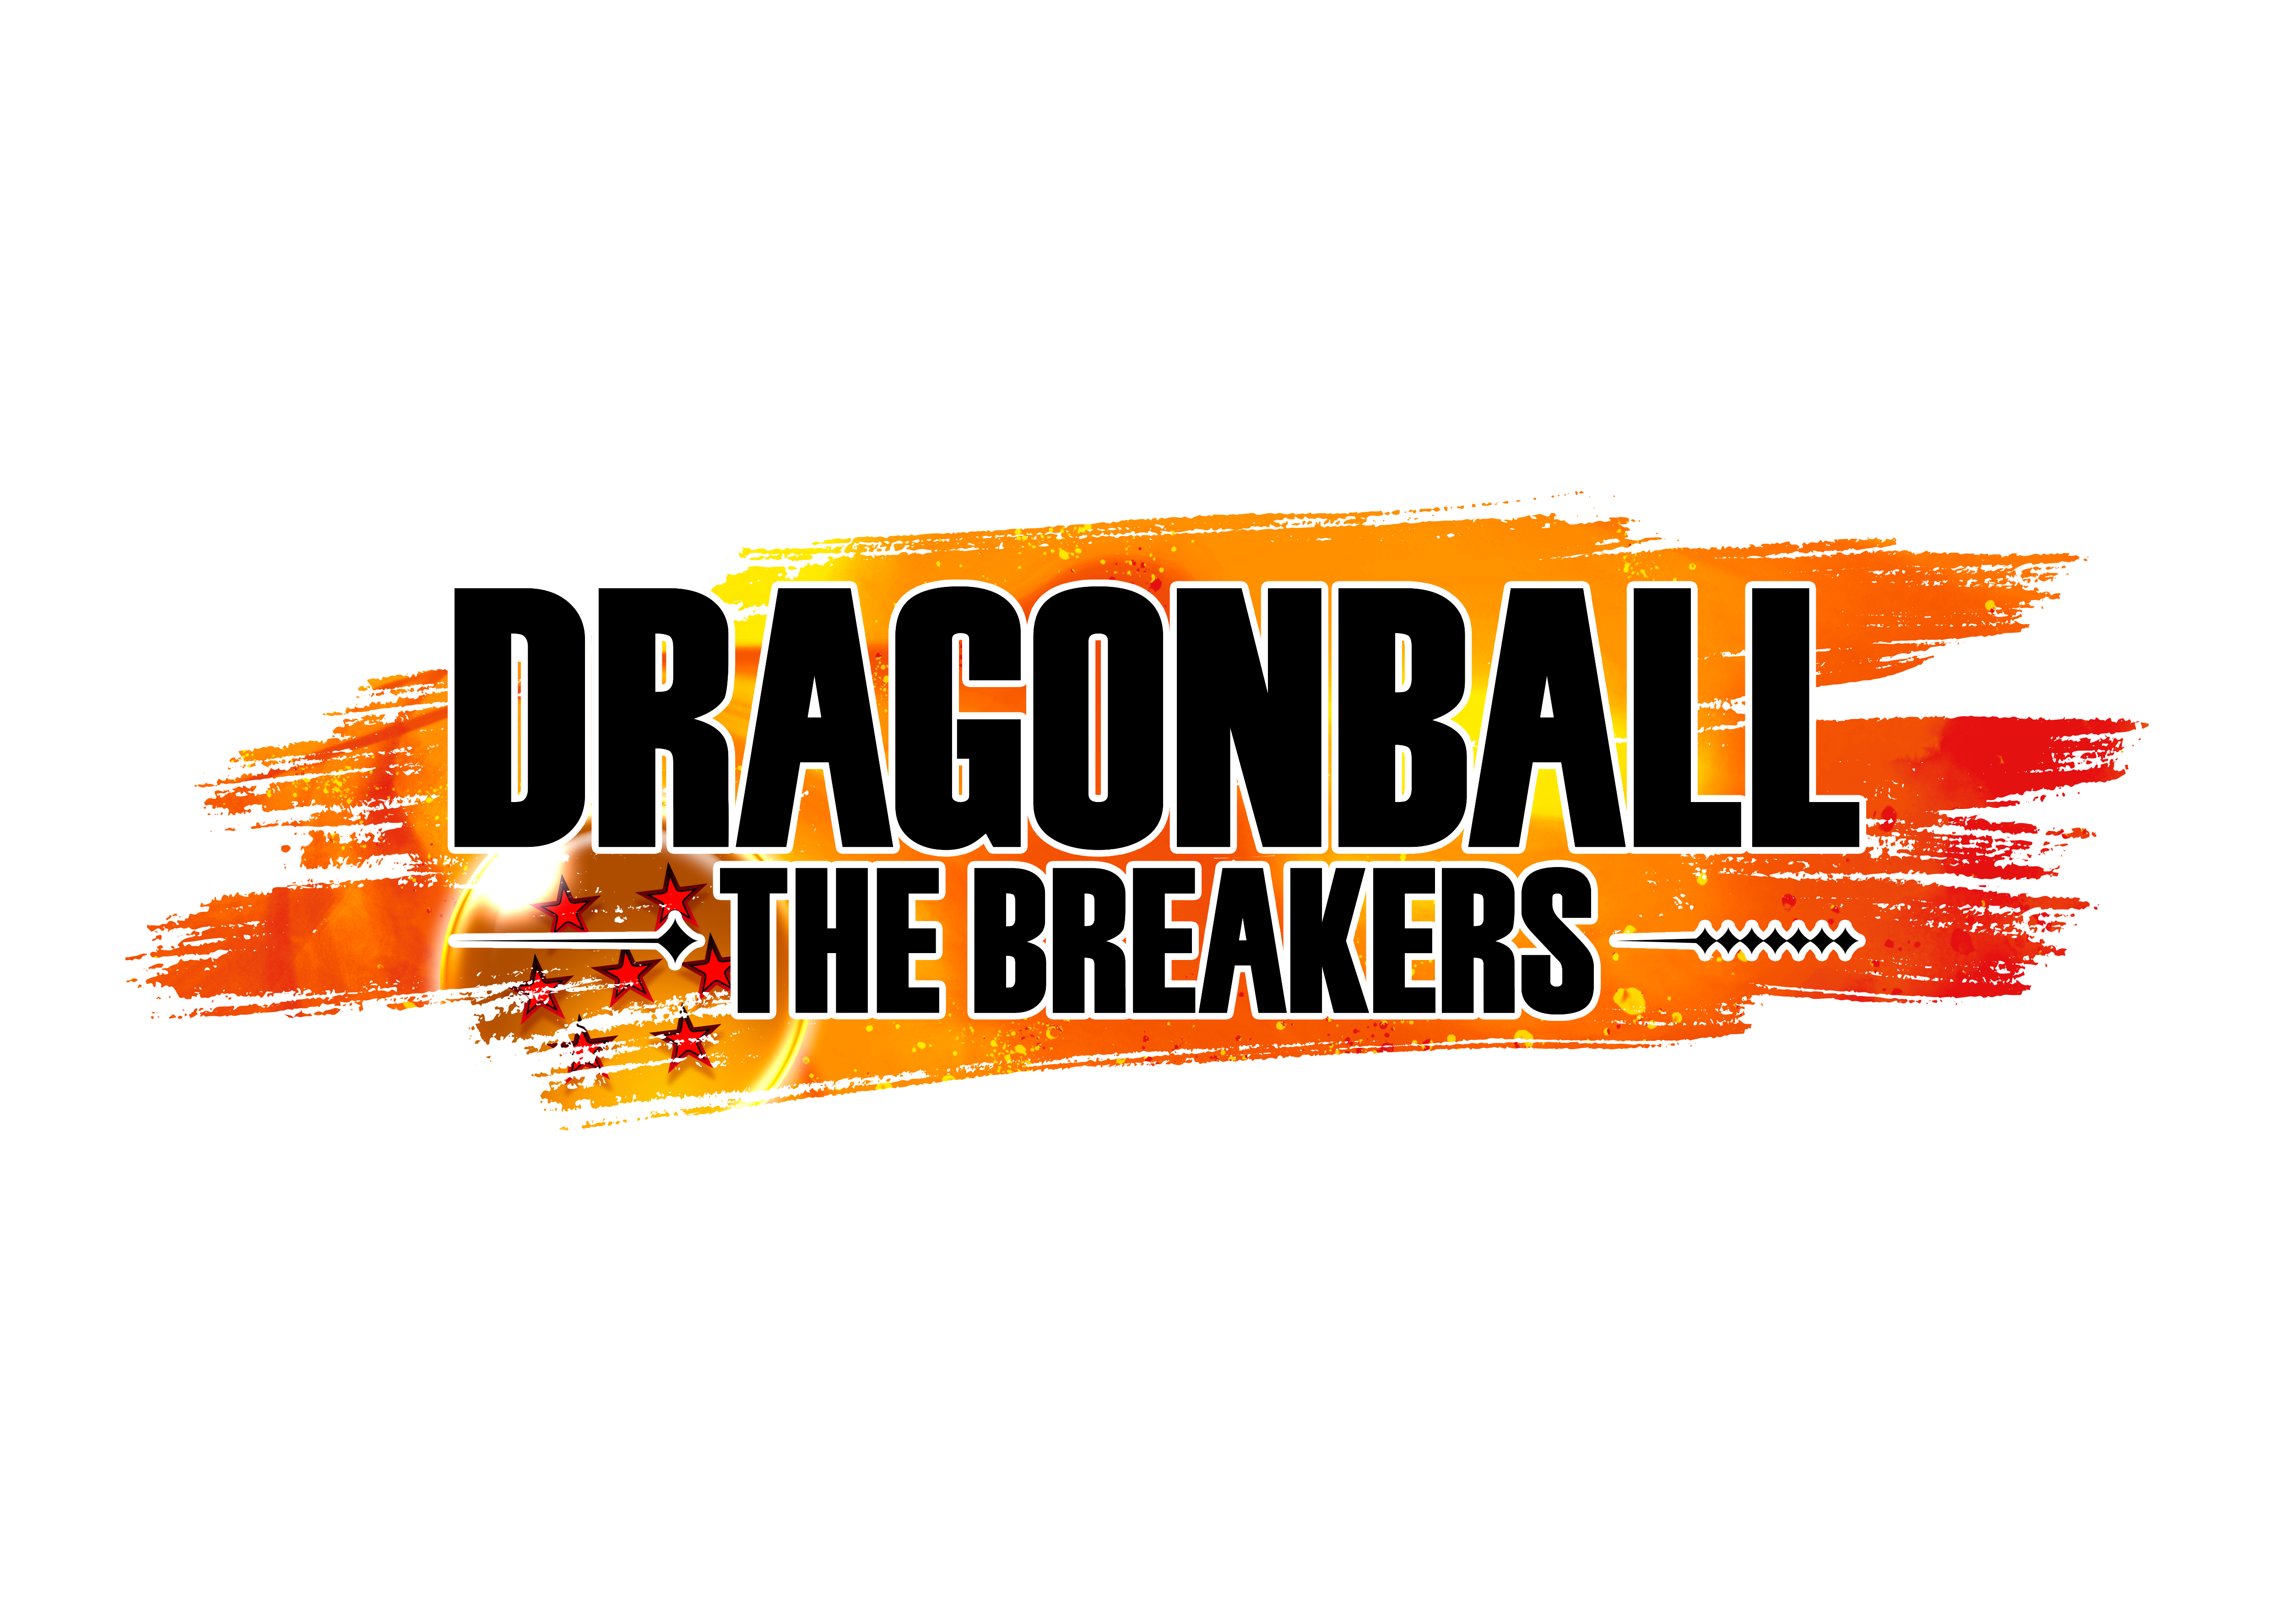 Check out DRAGON BALL: THE BREAKERS CNT guide!